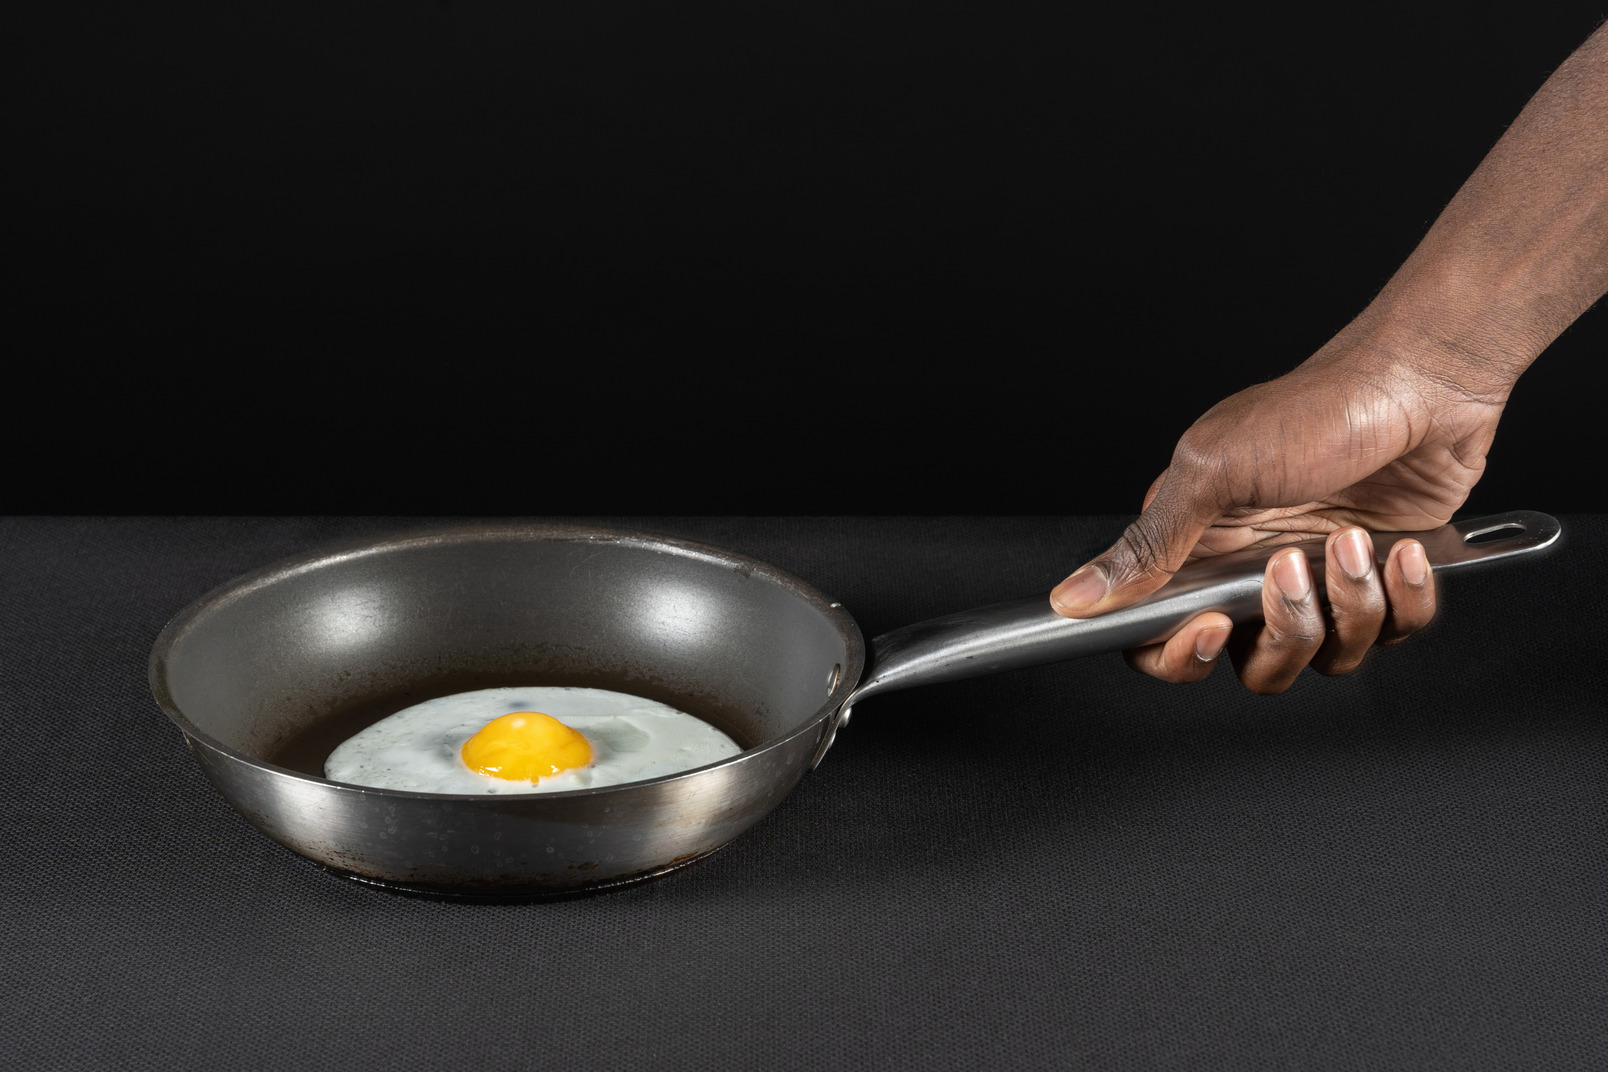 Human arm holding a fried egg on pan